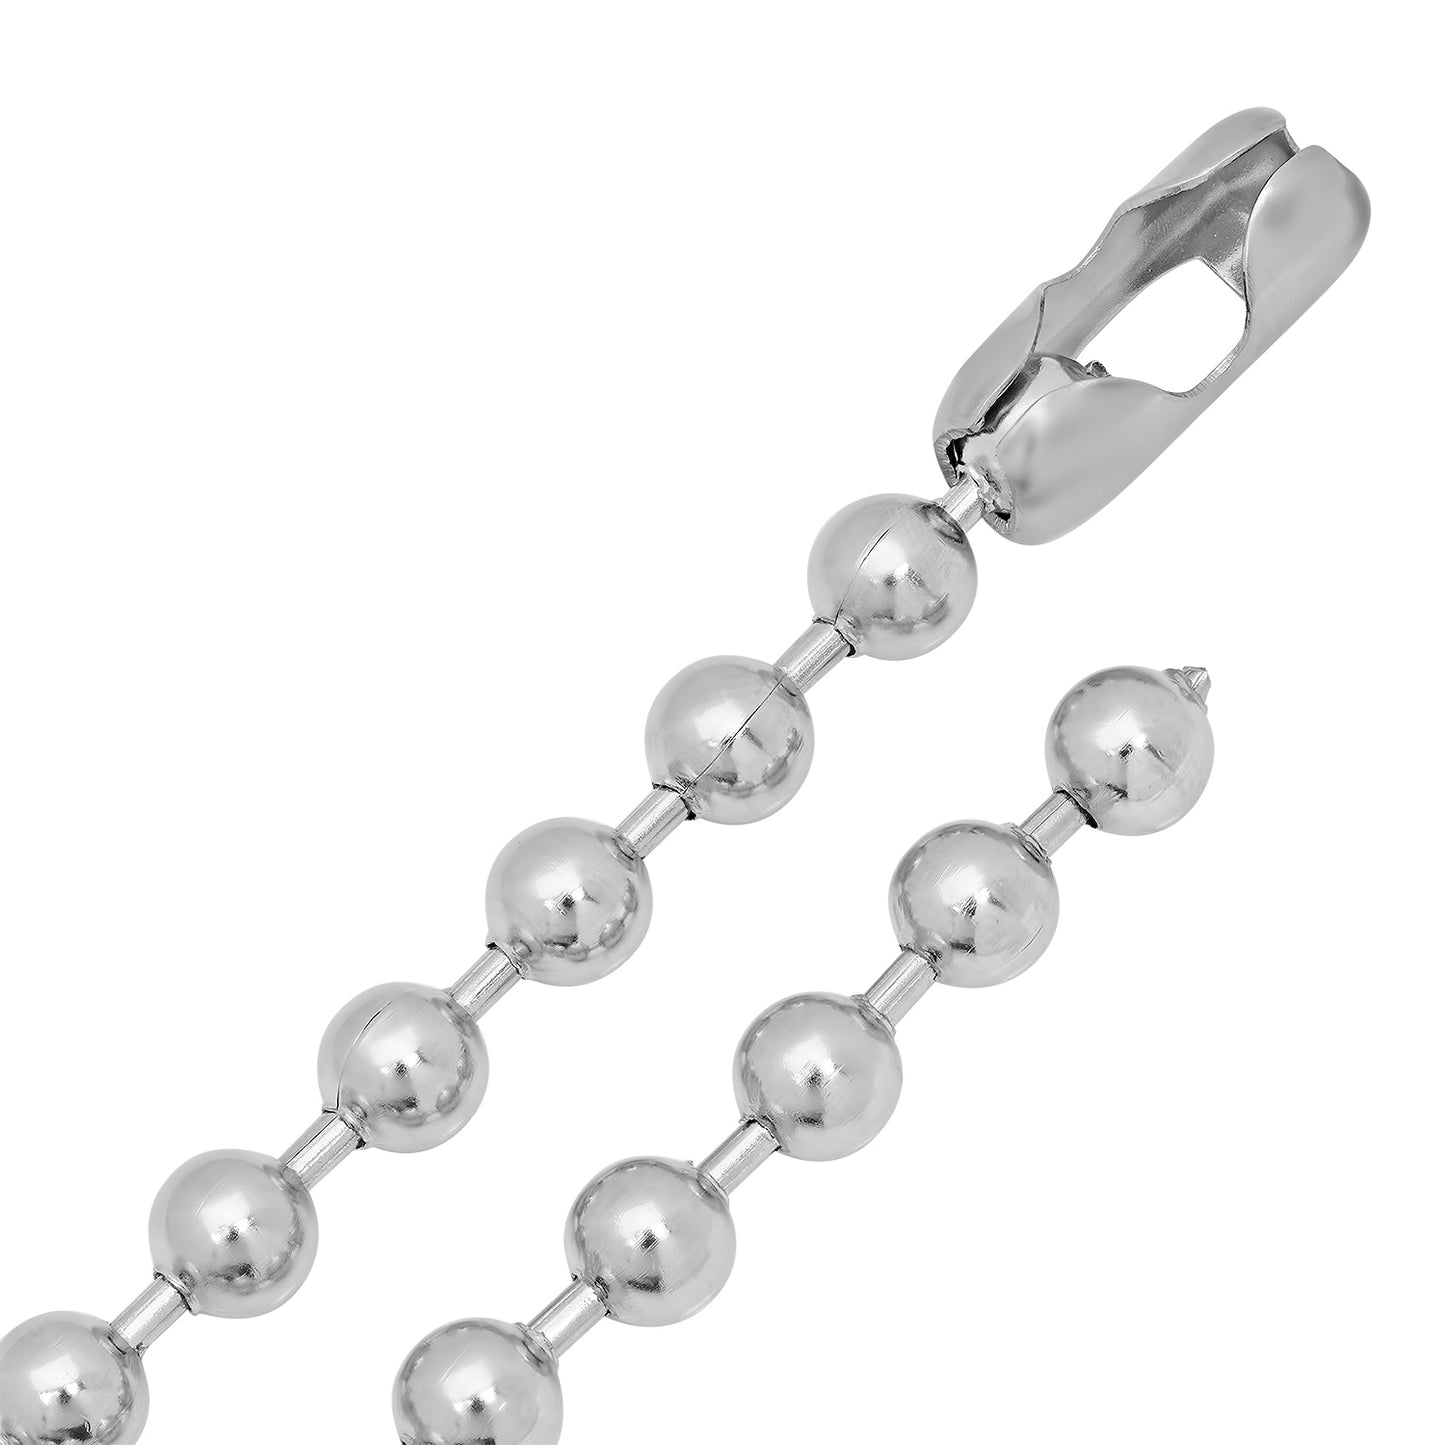 Men's 8mm High-Polished Stainless Steel Ball Military Necklace (SKU: ST-BAL800)